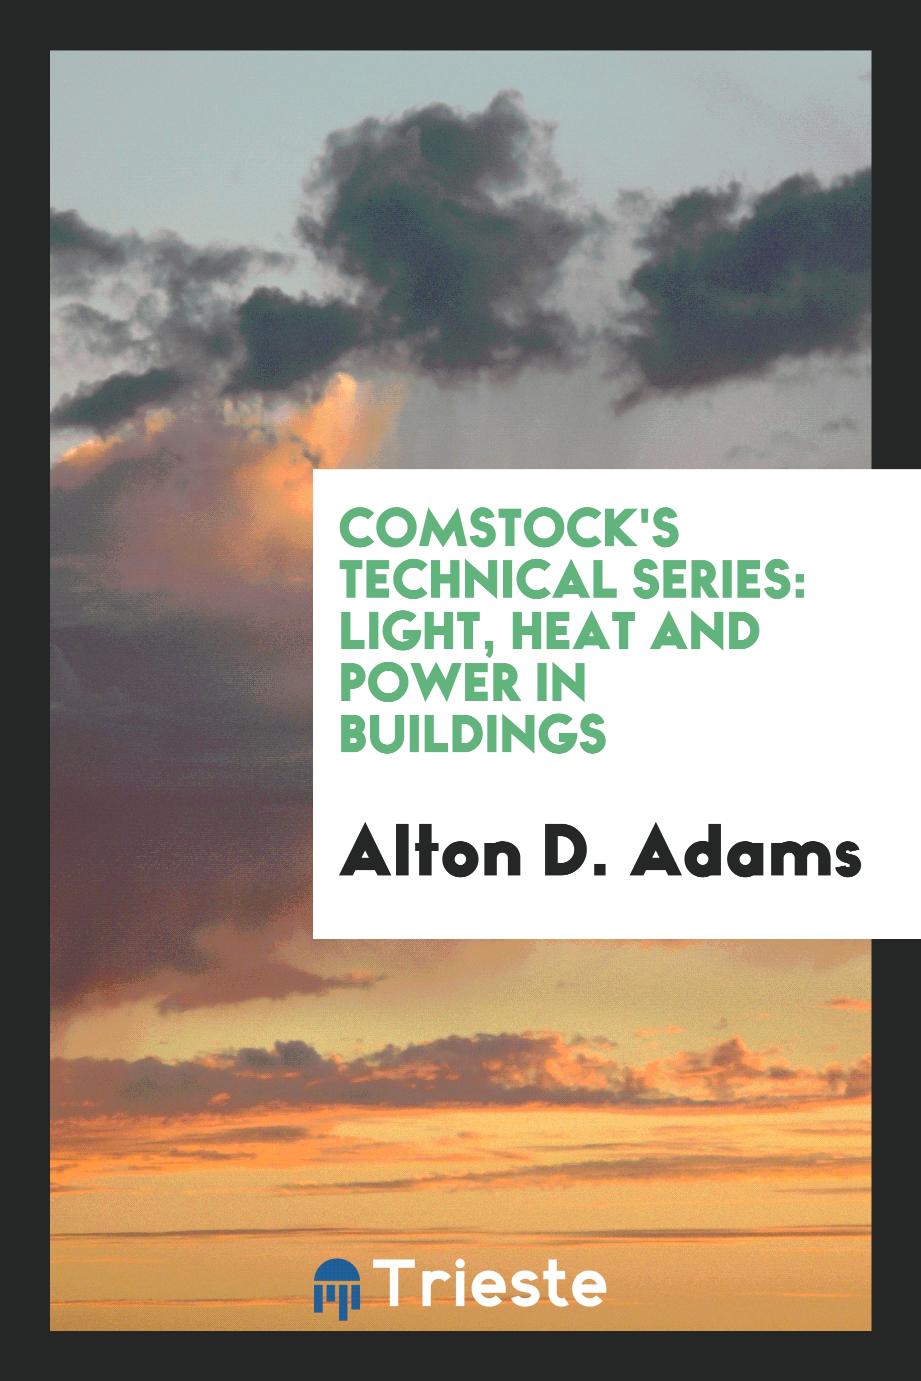 Comstock's Technical Series: Light, Heat and Power in Buildings